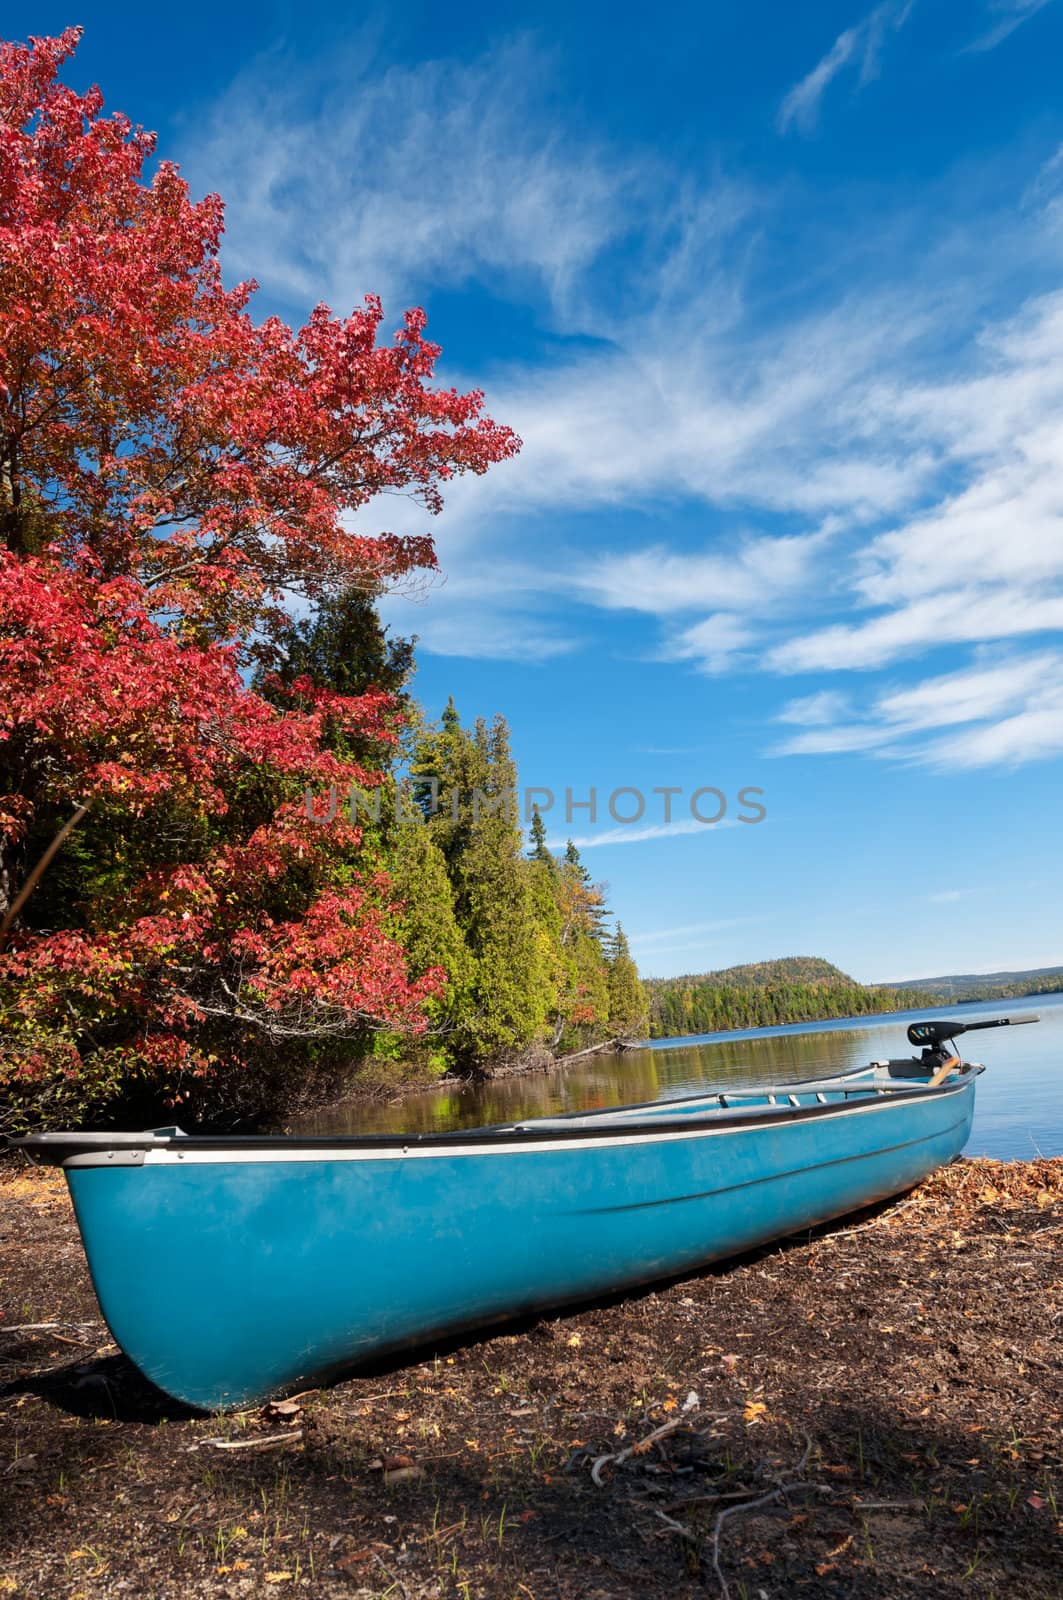 Kayak, Boat during sunny day at a lake with blue sky